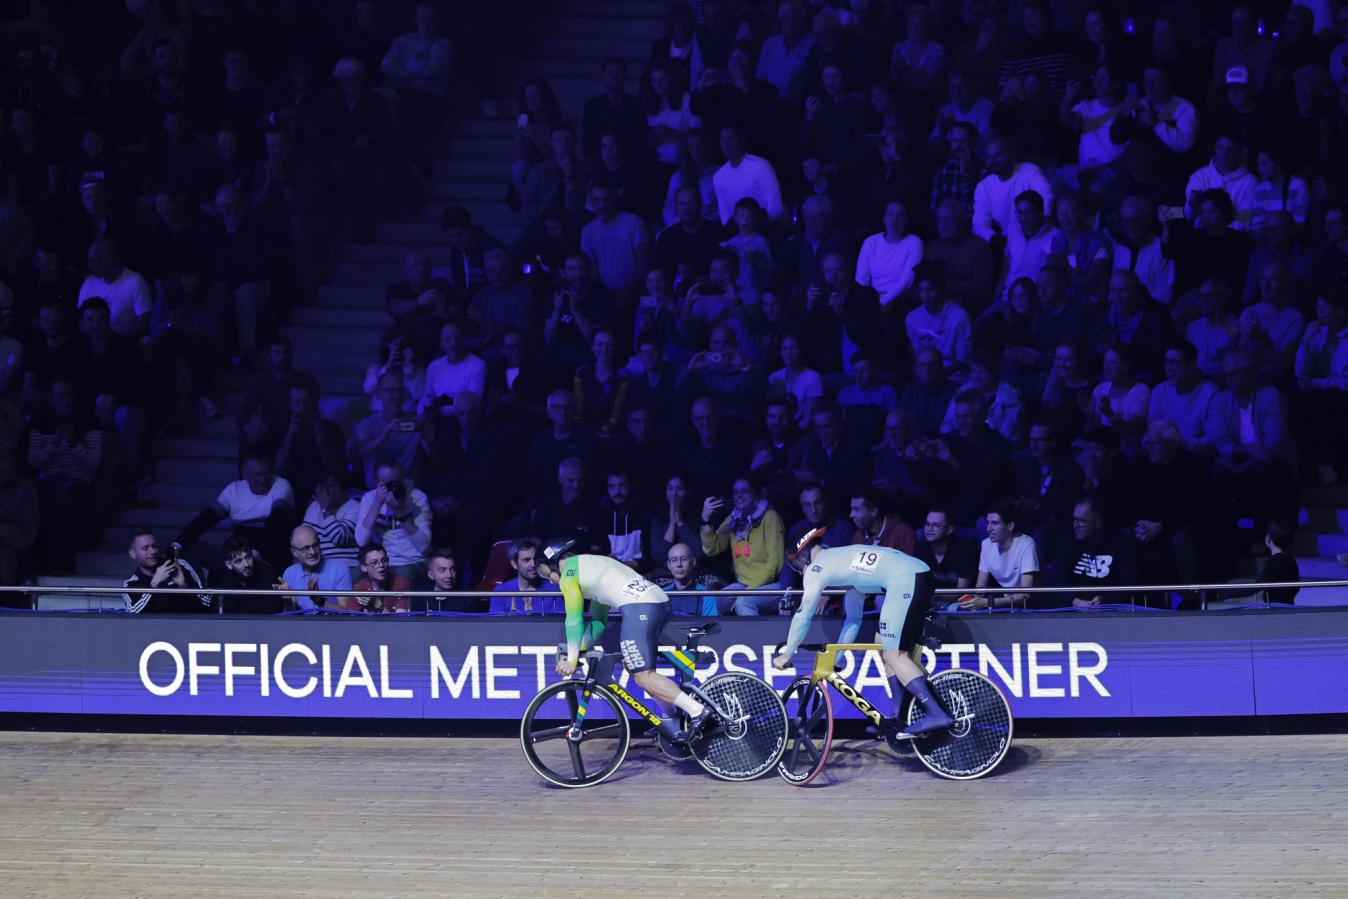 Track stands and mind games in the mens sprint final